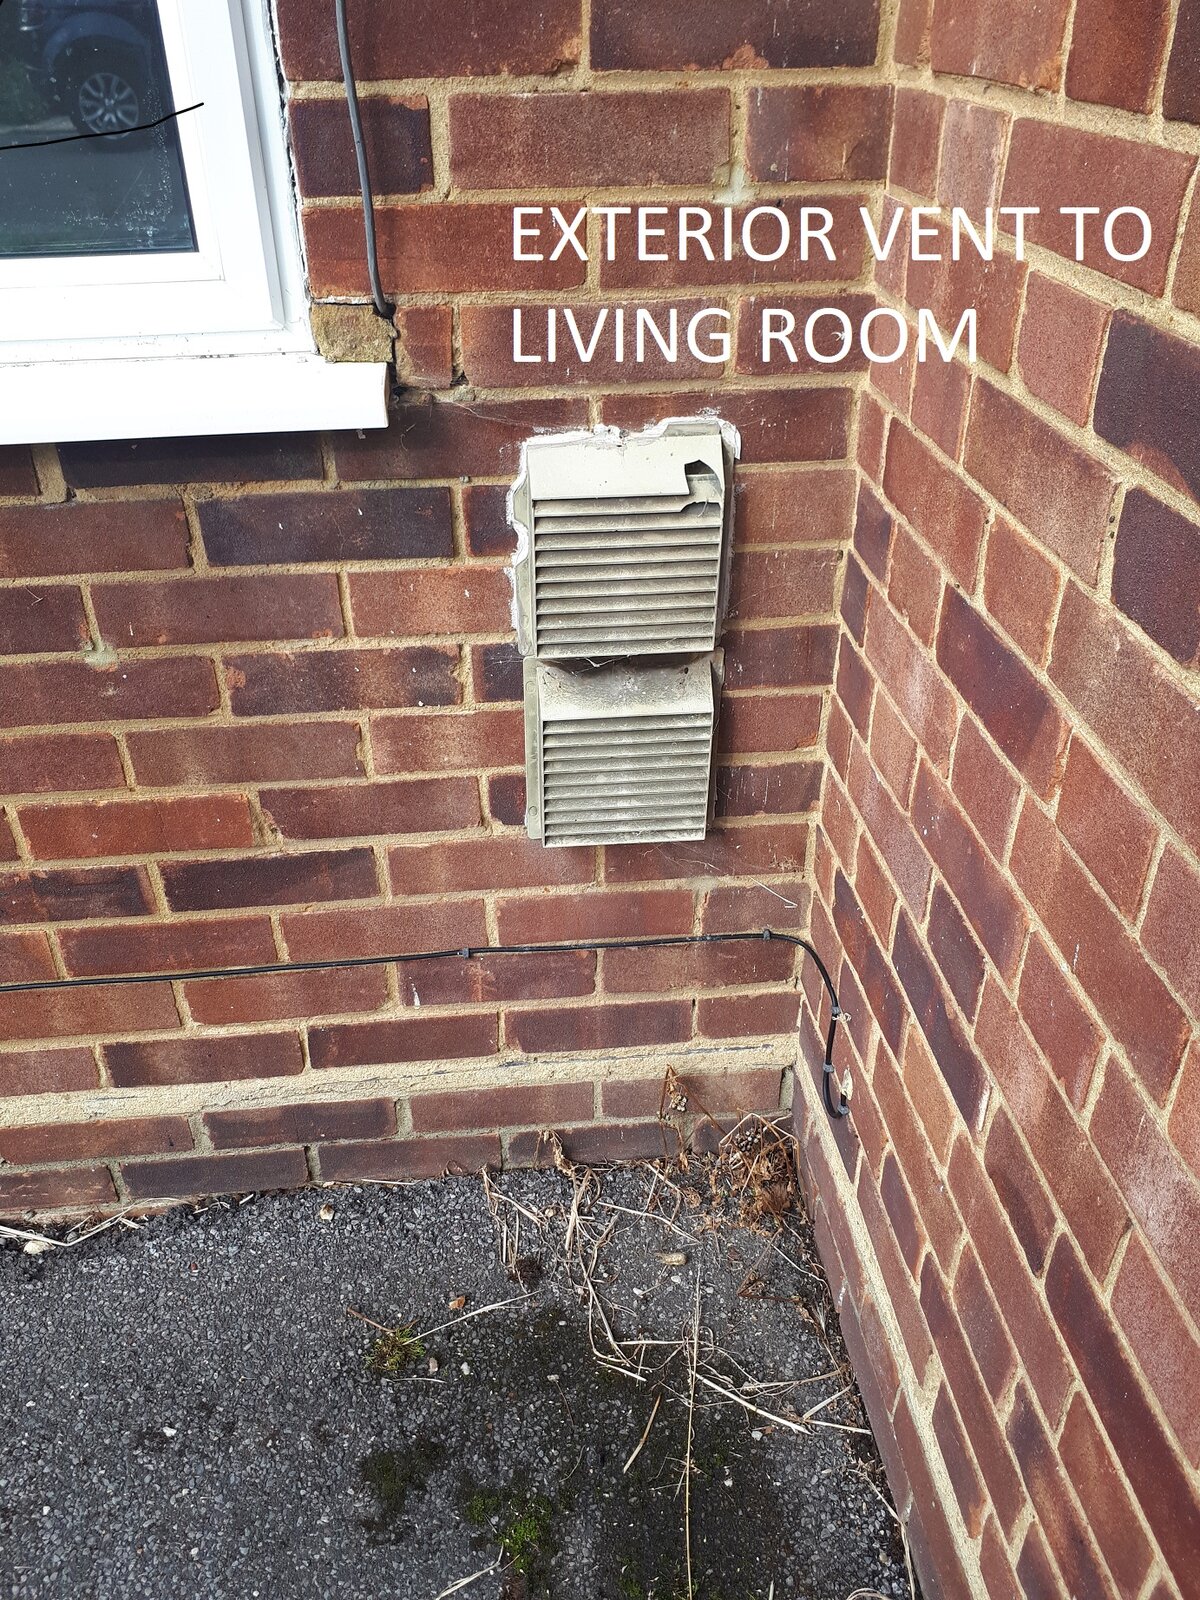 Exterior vent to Living room.jpg